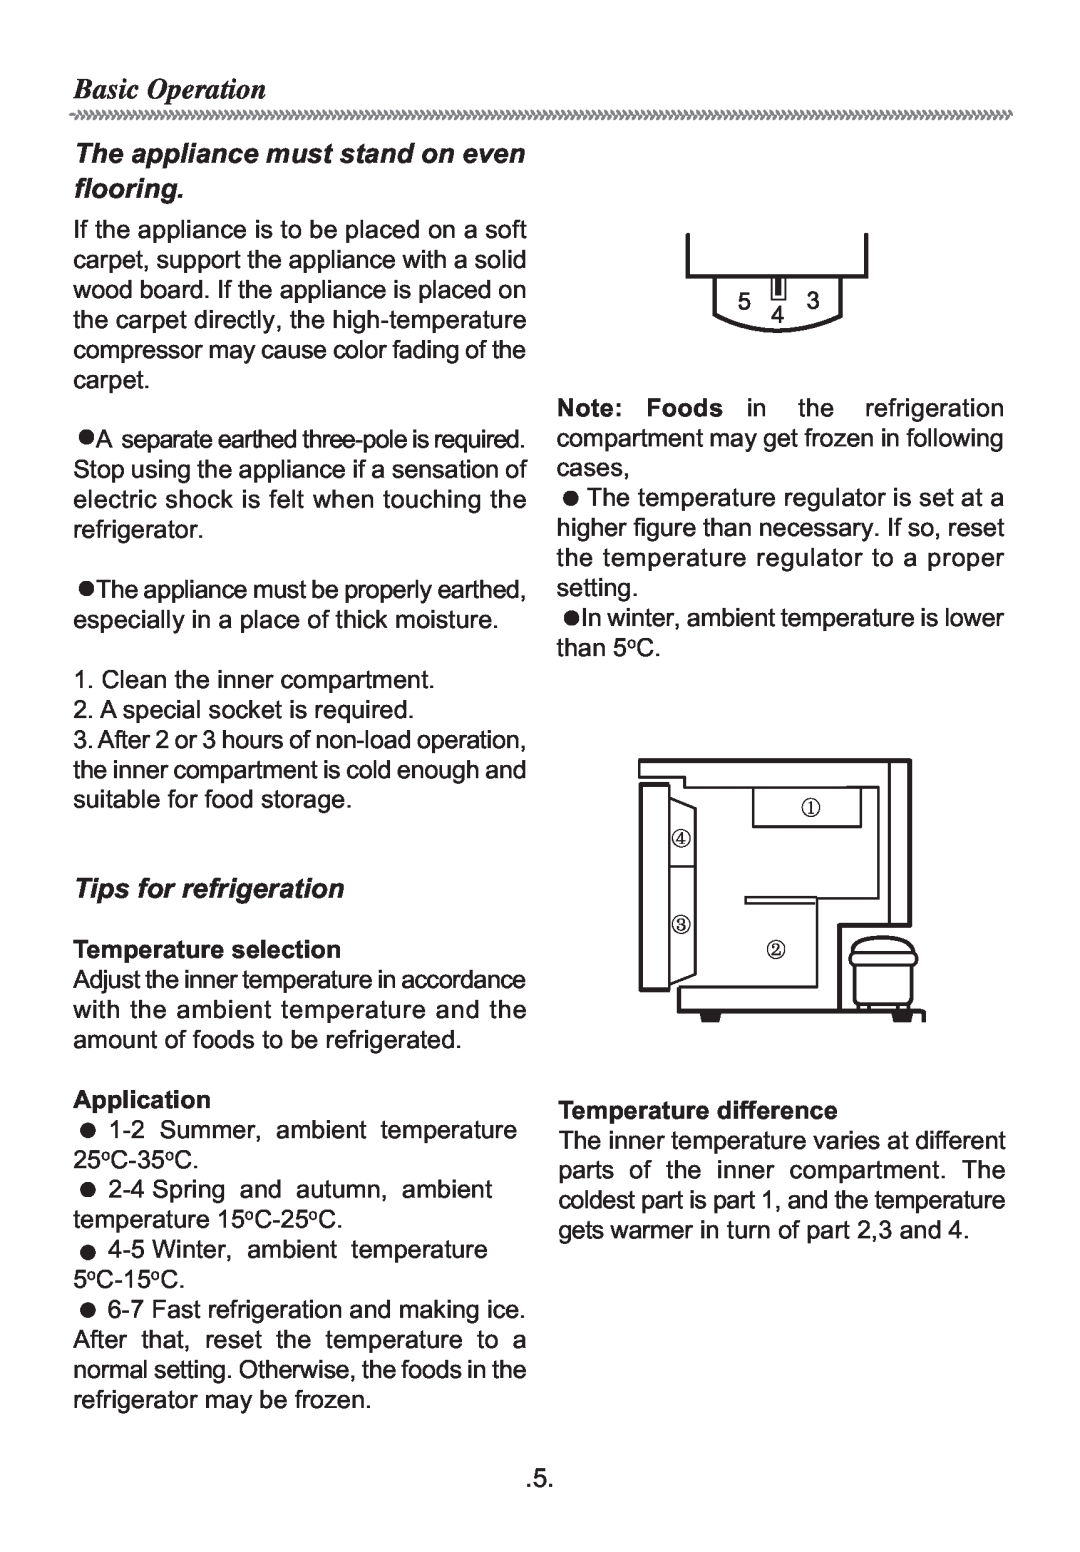 Haier HR-126 Basic Operation, The appliance must stand on even flooring, Tips for refrigeration, Temperature selection 